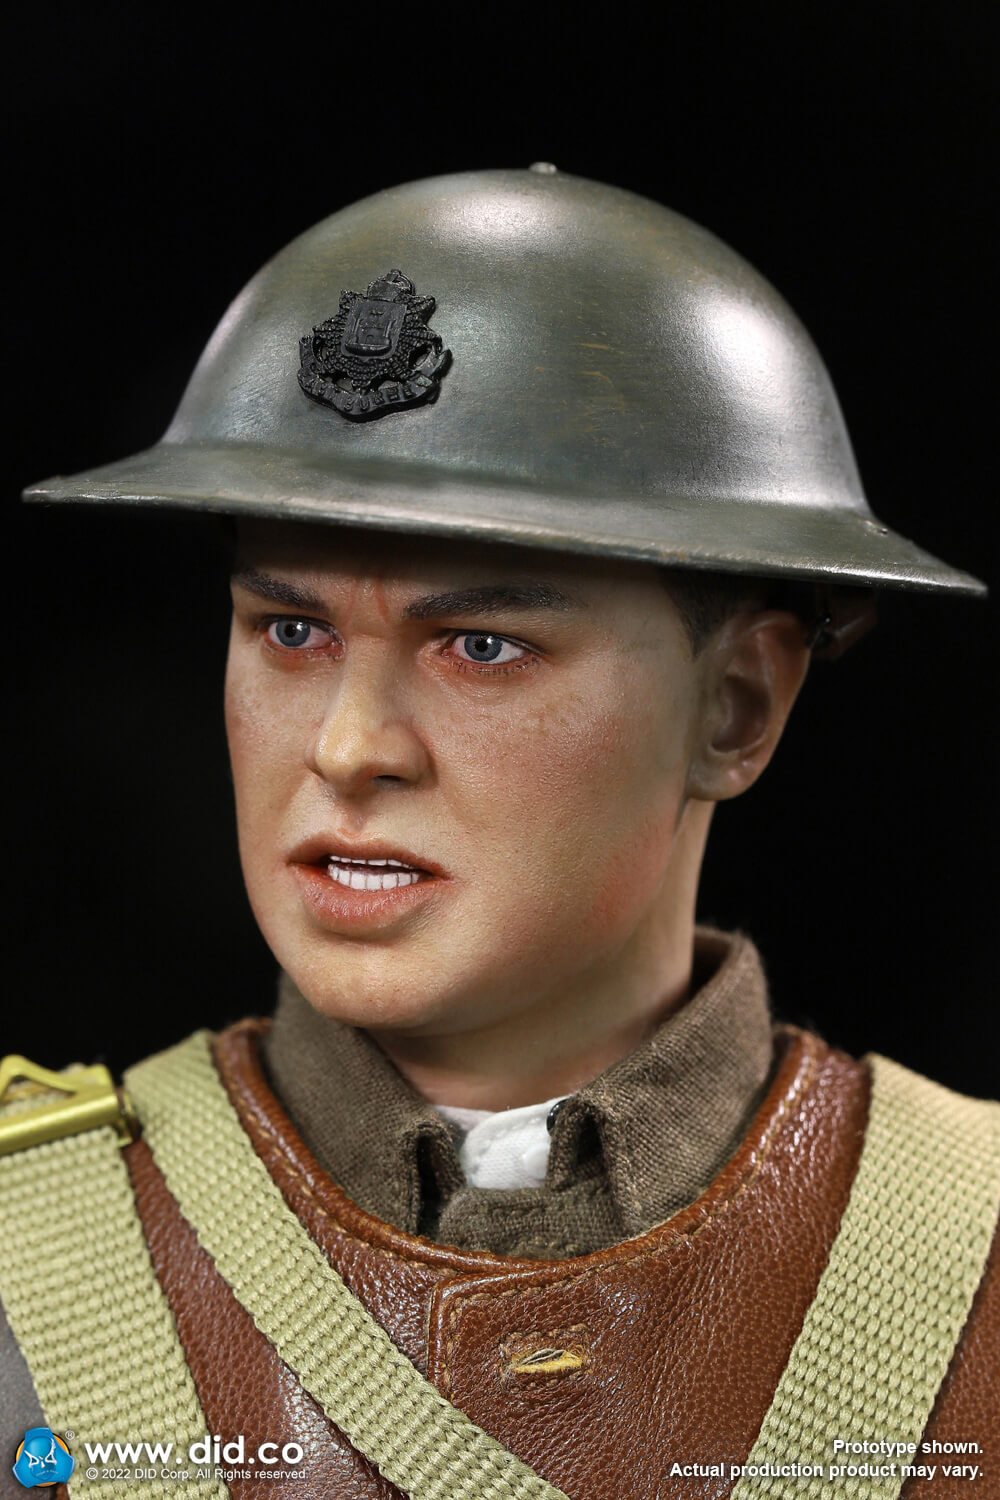 BritishInfantry - NEW PRODUCT: DiD: B11013 – 1/6 scale WWI British Infantry Lance Corporal Tom & E60064 – WWI Trench Diorama Set B 17298